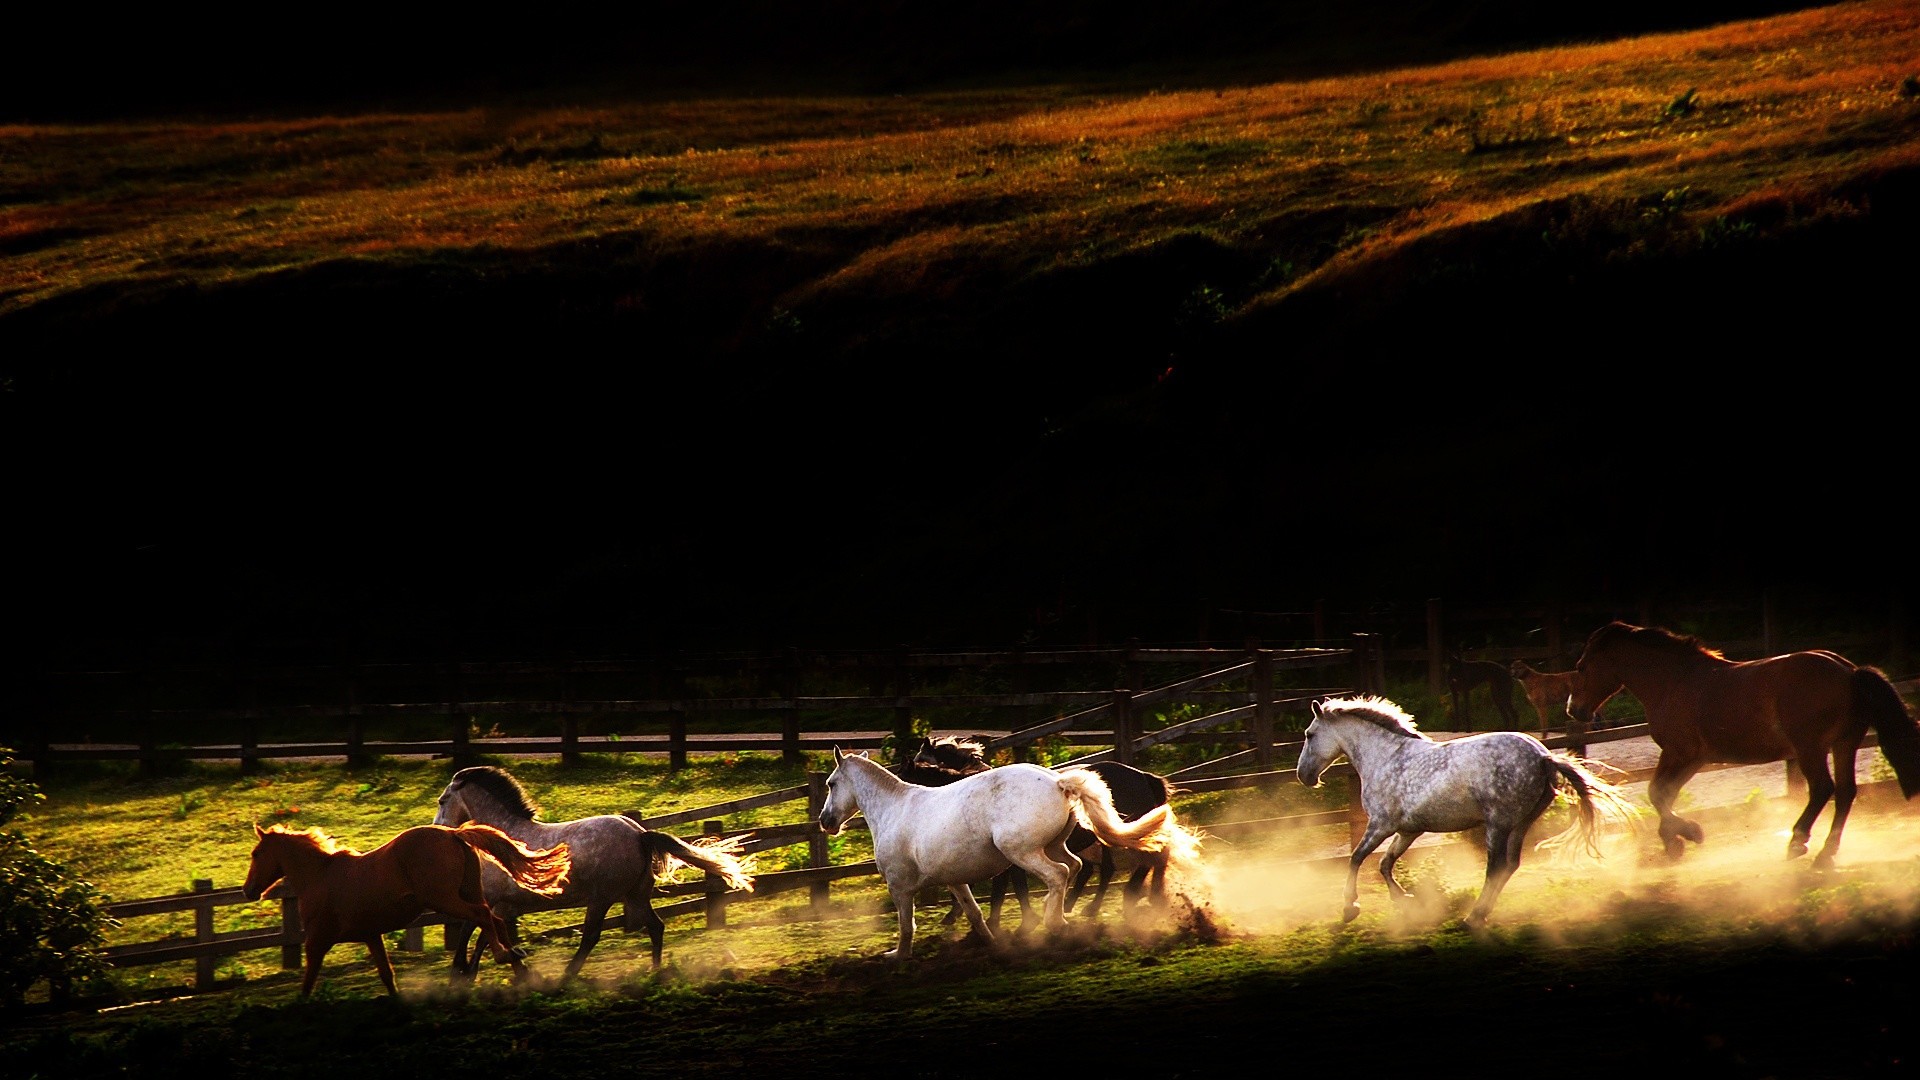 1920x1080 1000+ images about Horses PC Wallpaper on Pinterest | Wallpaper .